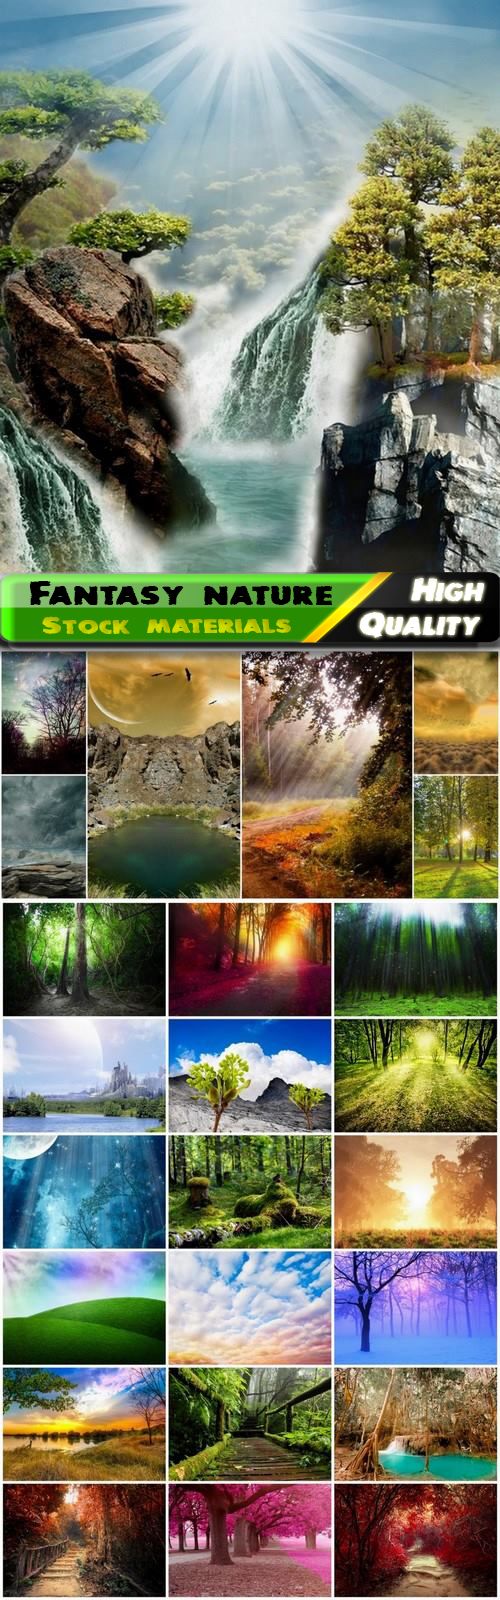 Fantasy nature landscapes and beautiful scenery - 25 HQ Jpg